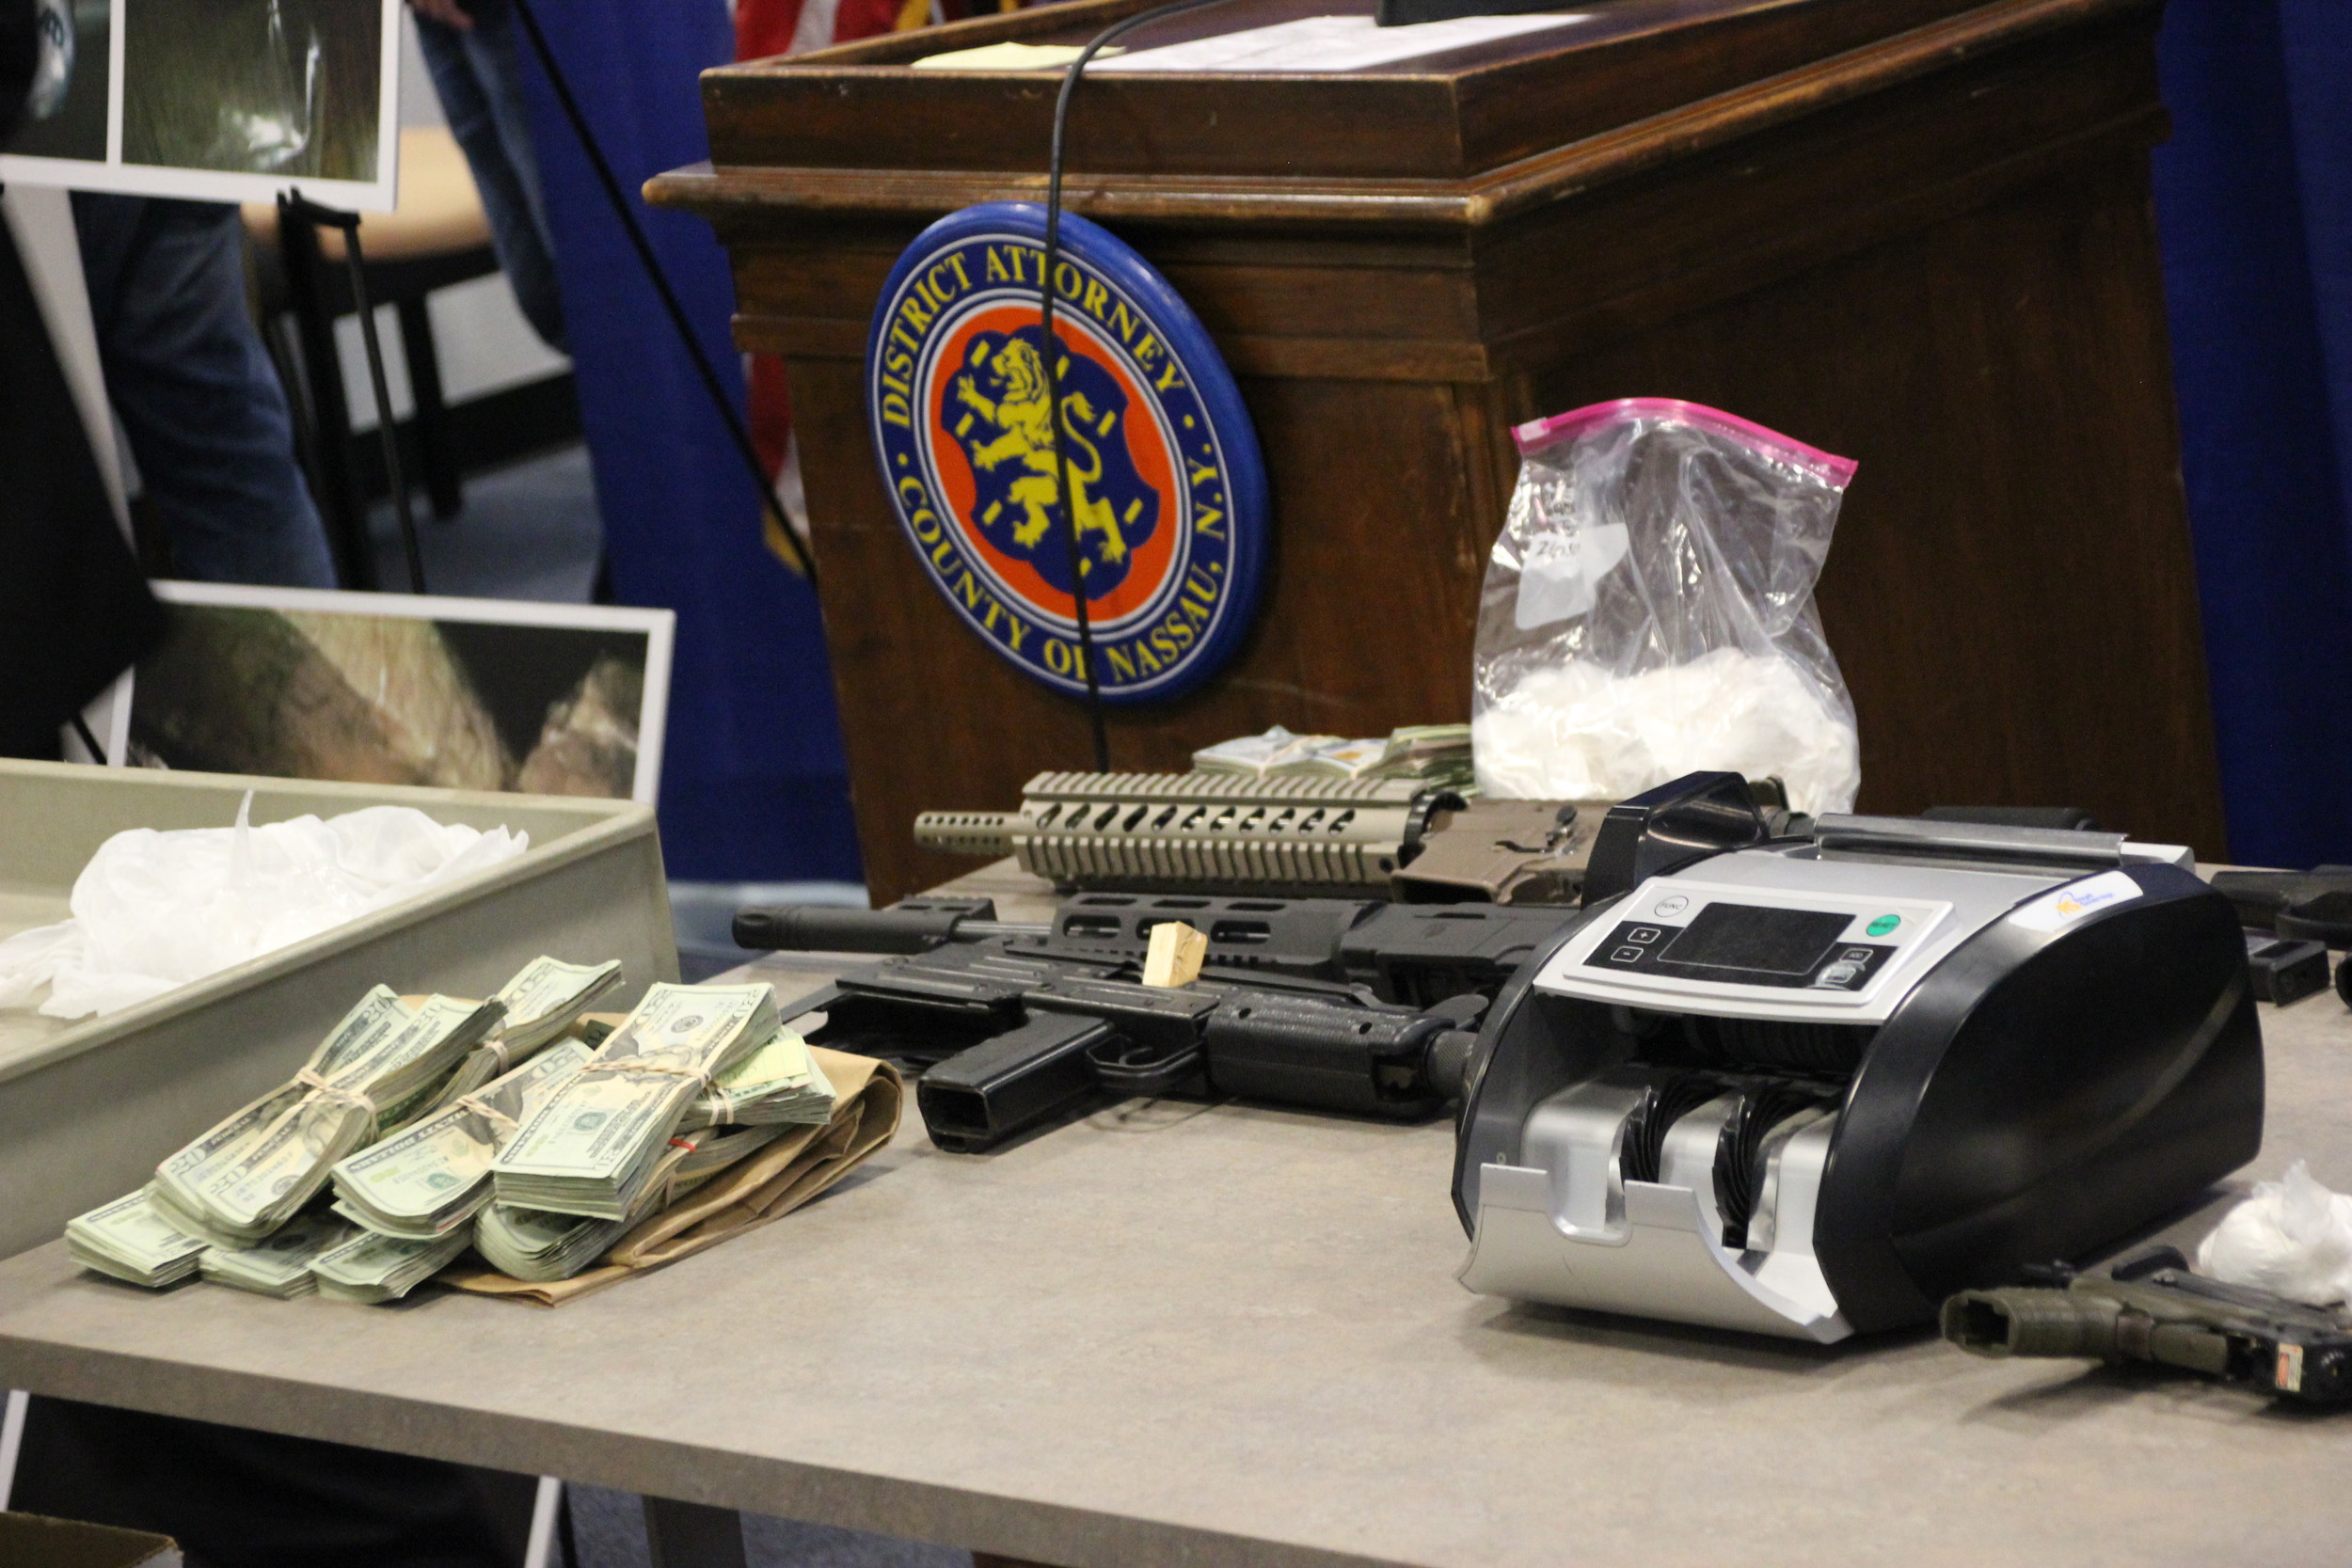 Drug paraphernalia, weapons and $75,000 in cash were recovered from suspects’ residences on July 14.